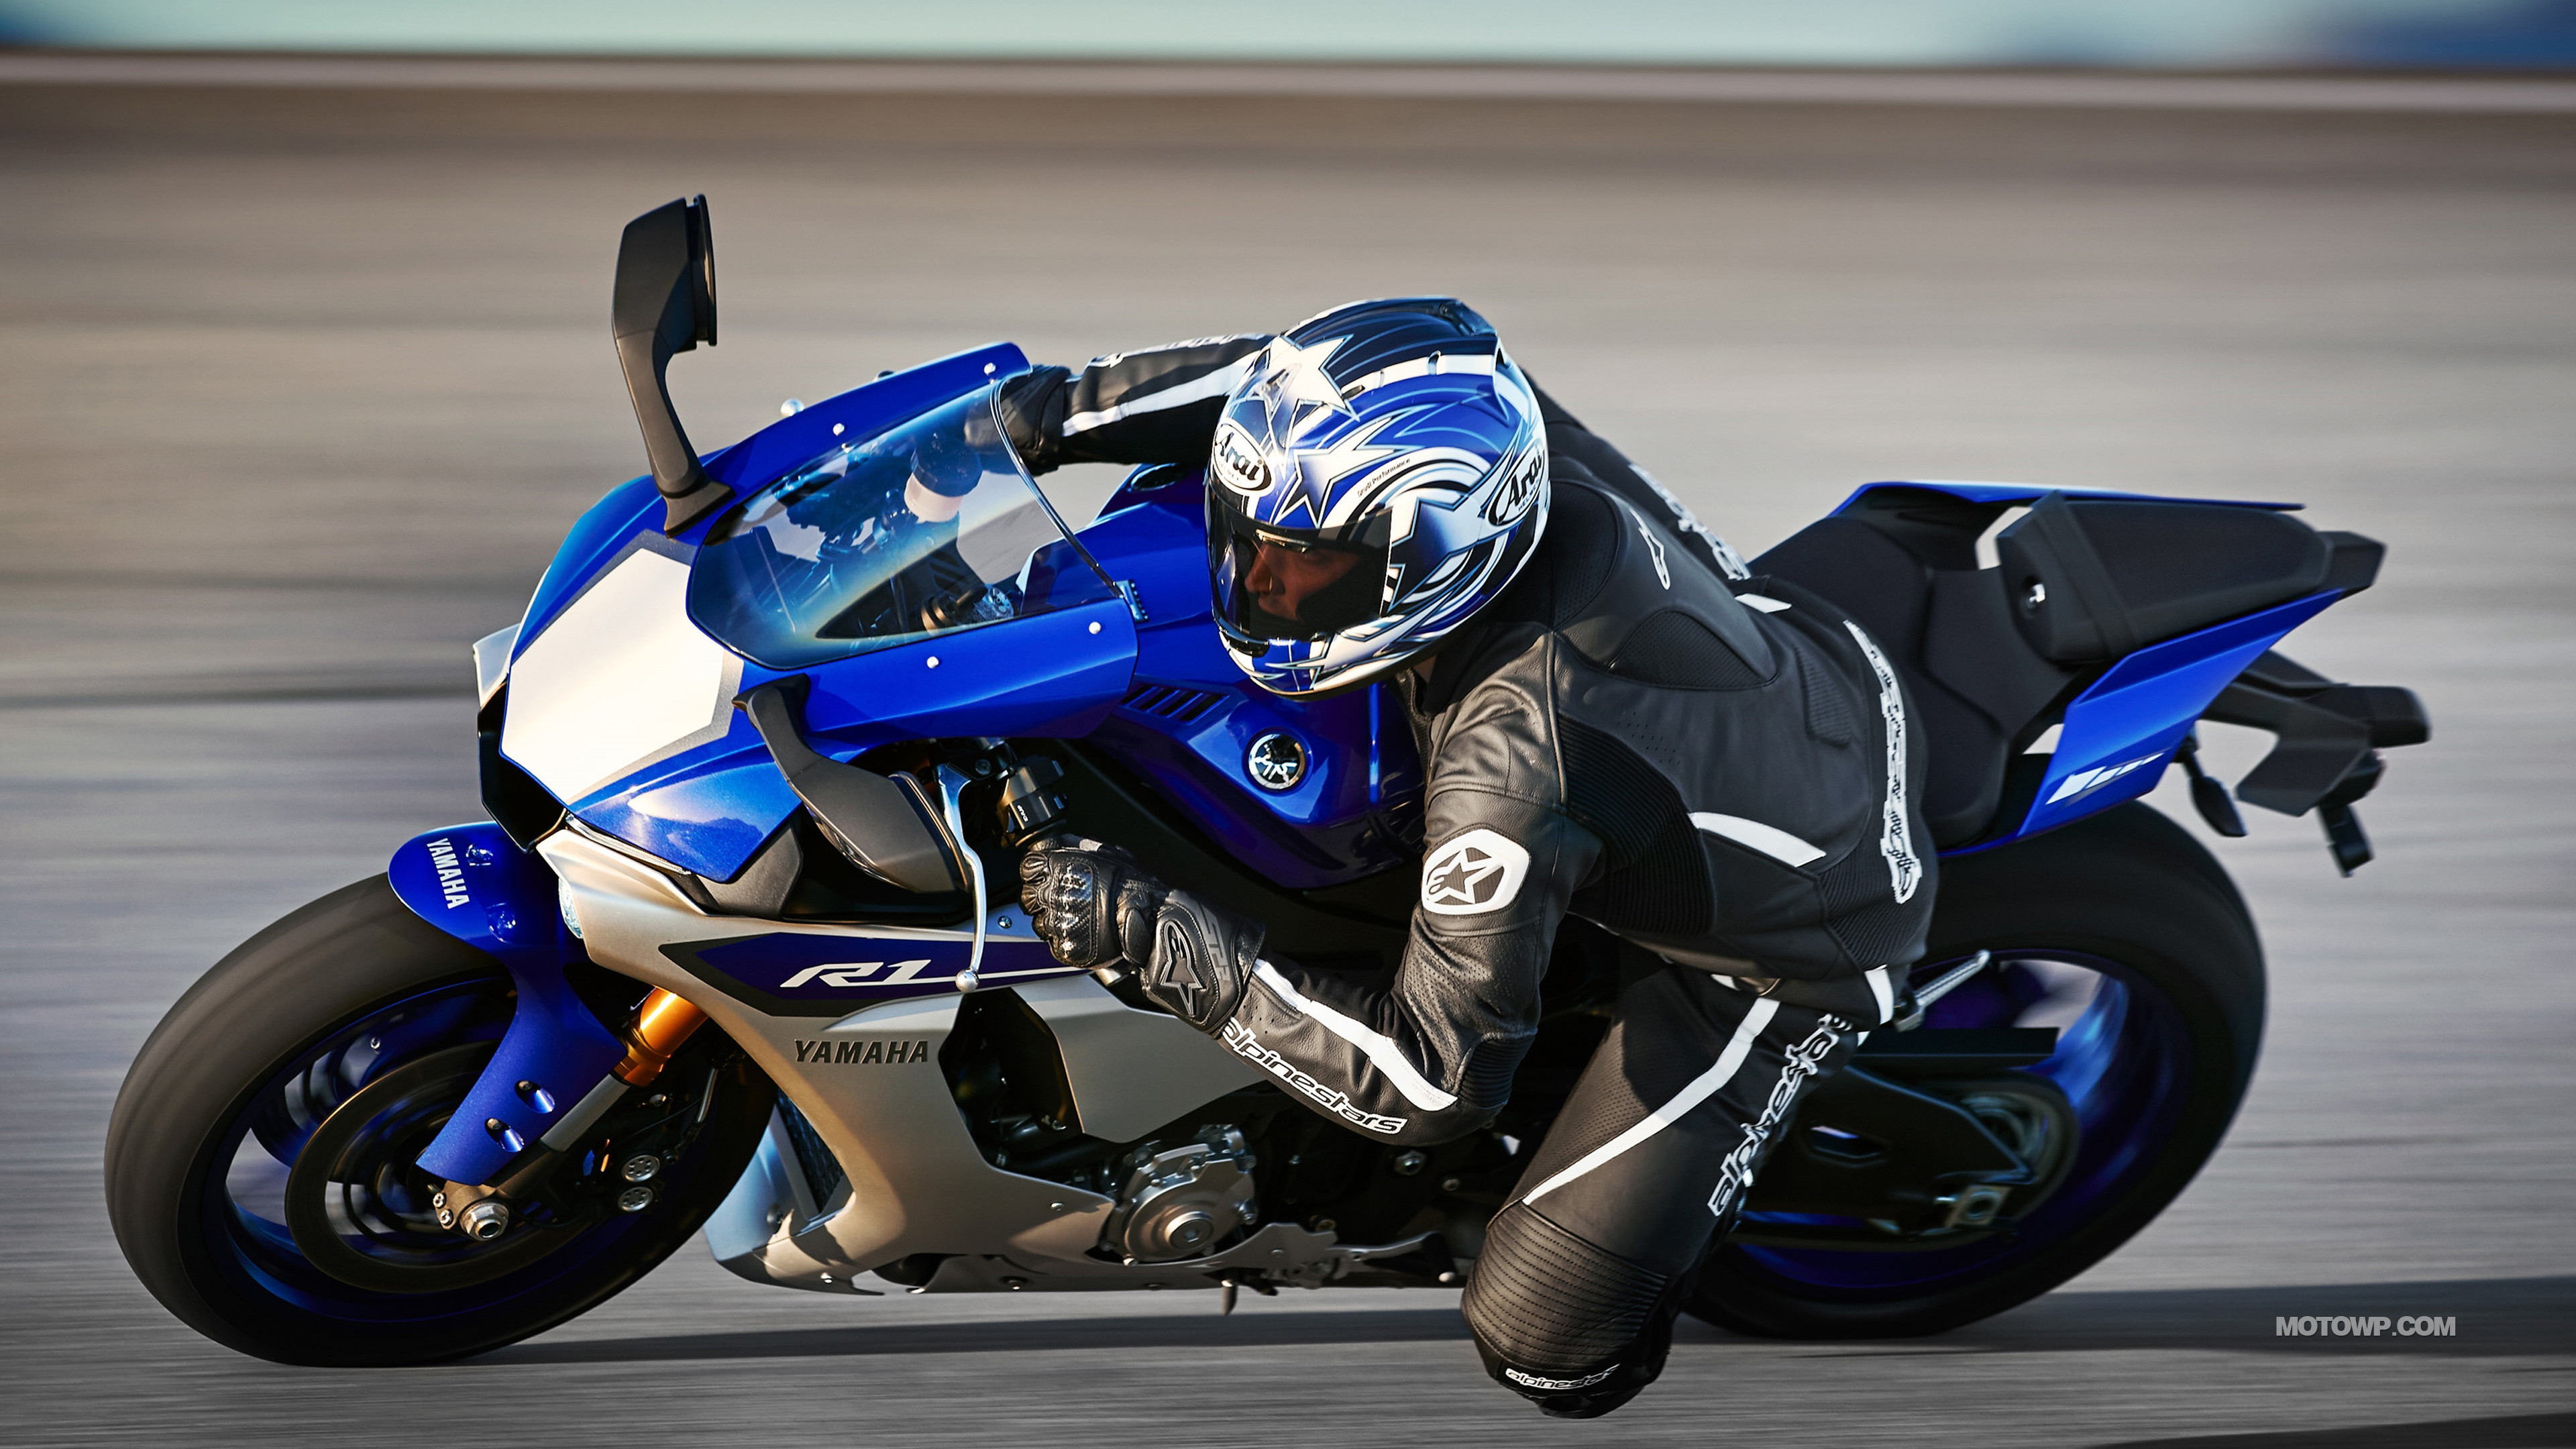 3840x2160 Motorcycles wallpapers Yamaha YZF-R1 - 2015